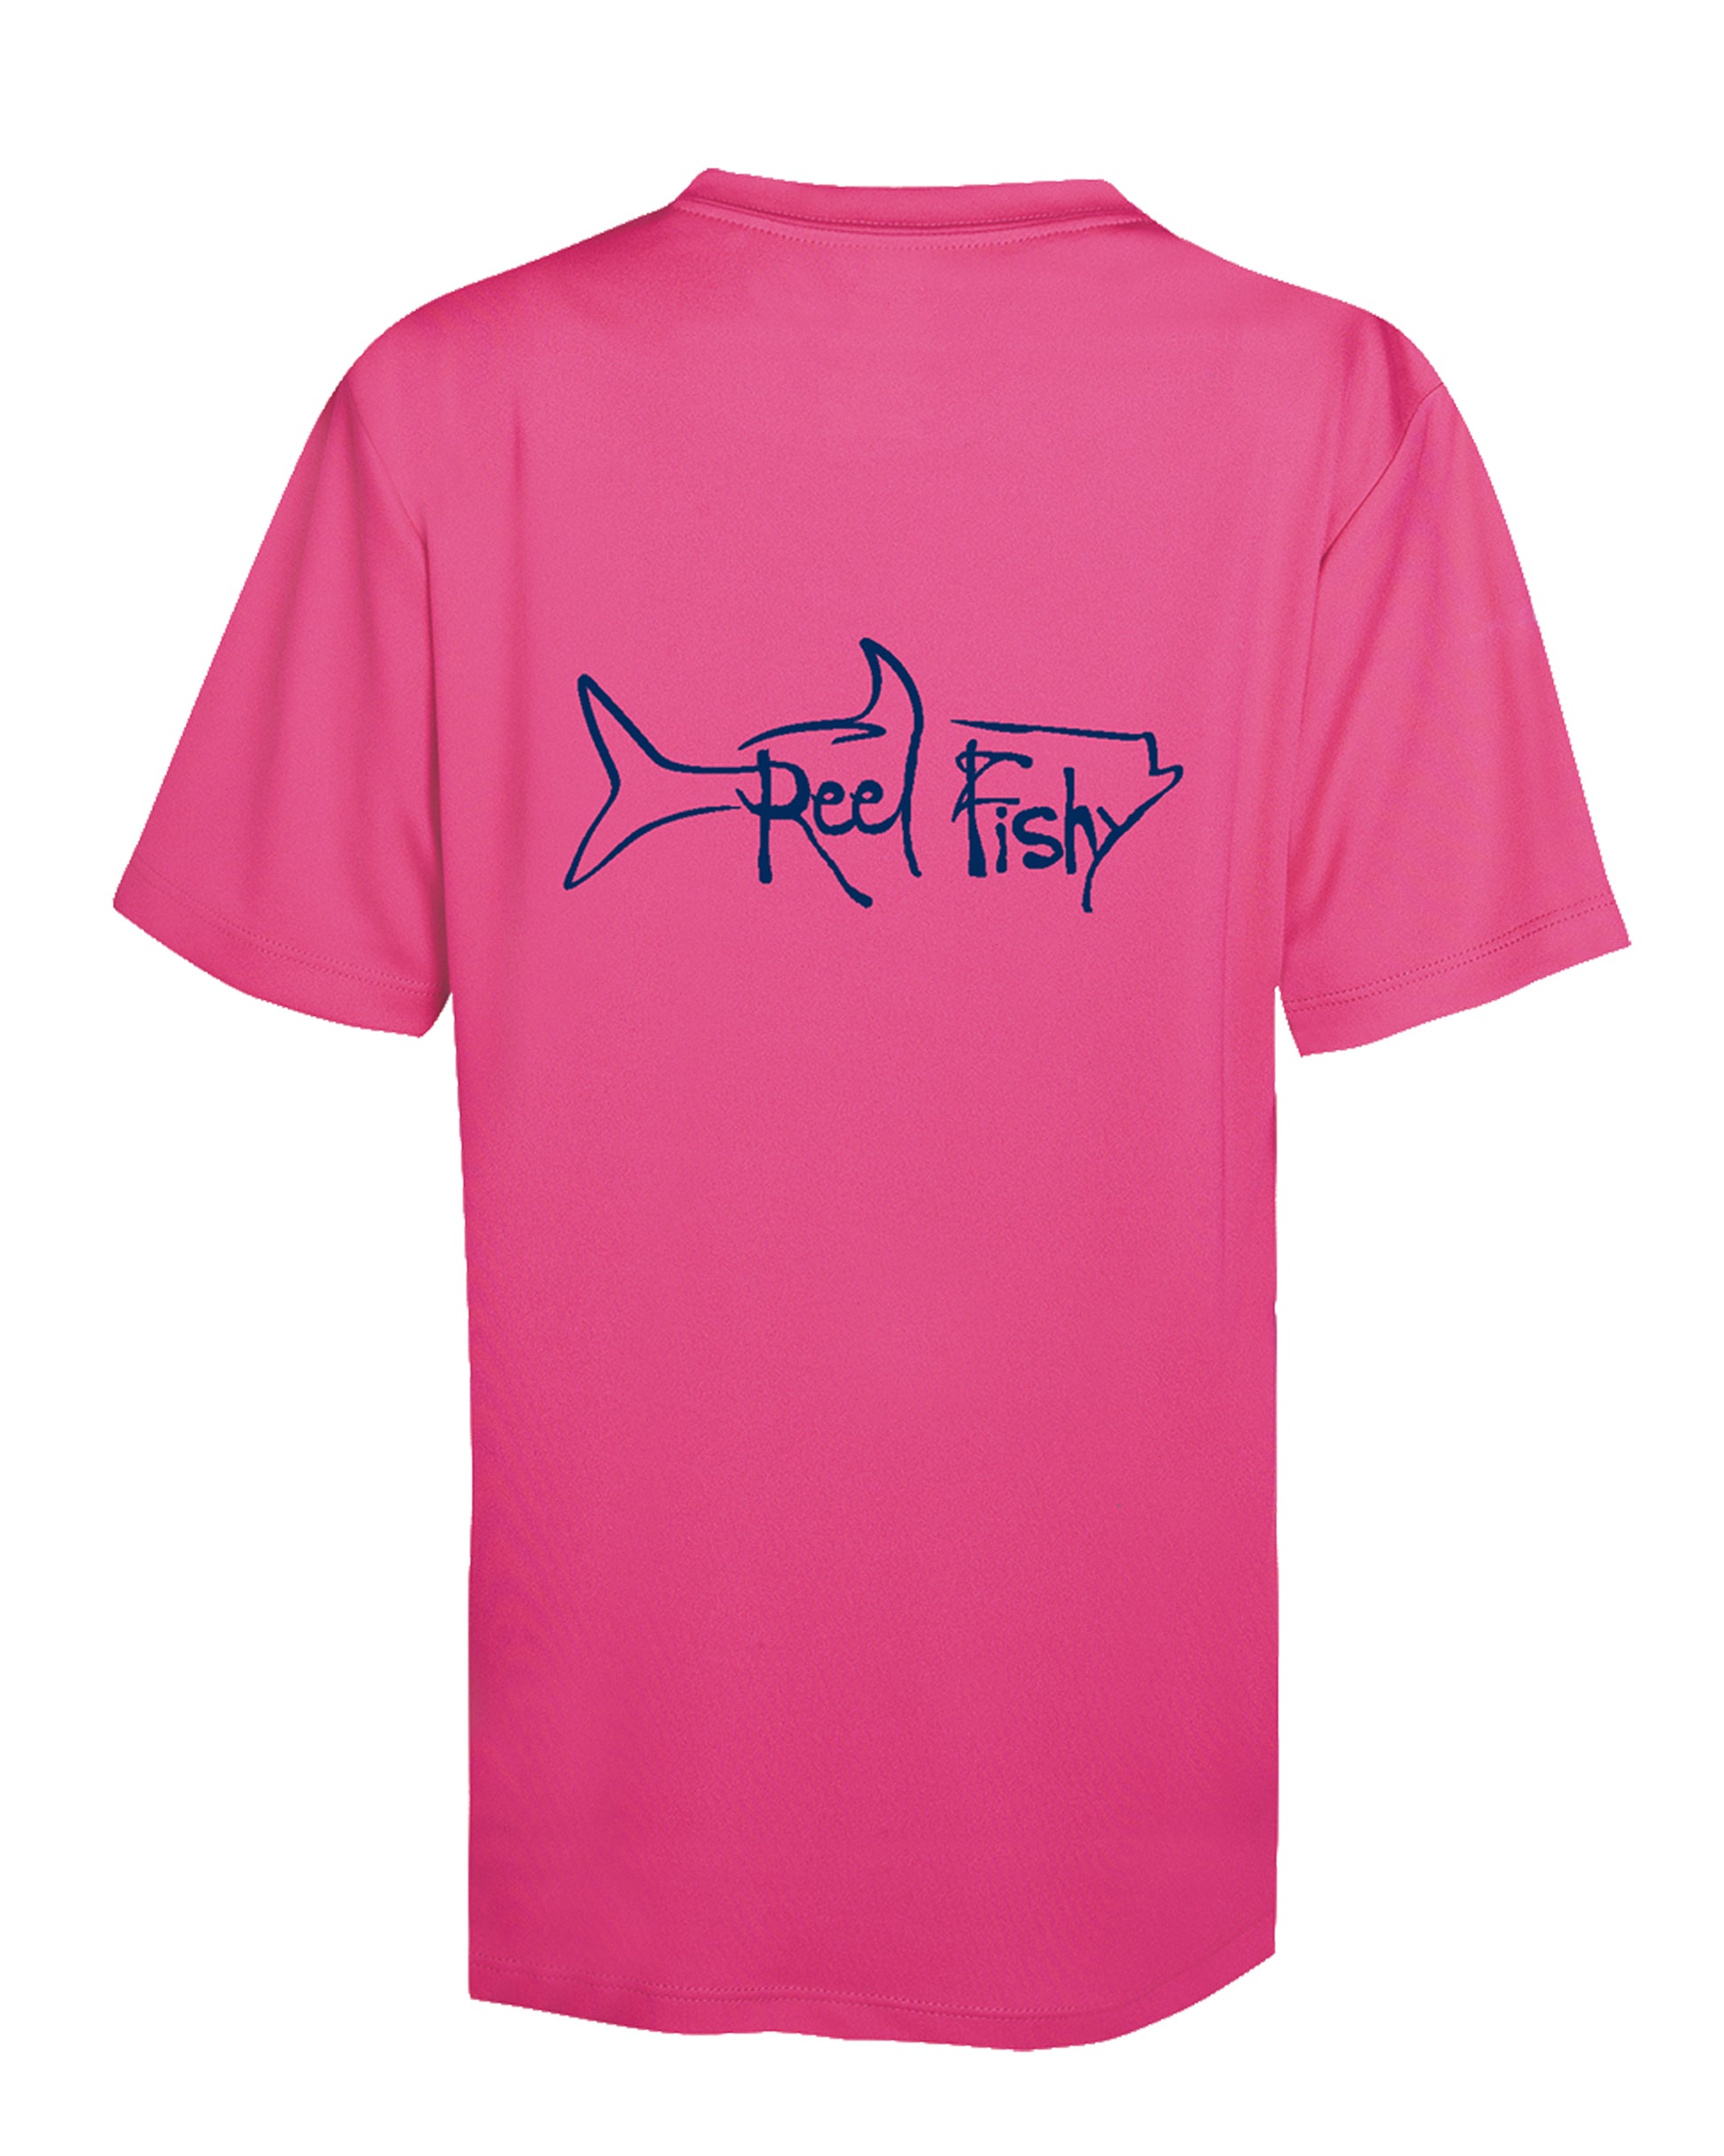 Youth Performance Dry-Fit Tarpon Fishing Shirts with Sun Protection by Reel Fishy Apparel - Short Sleeve Pink